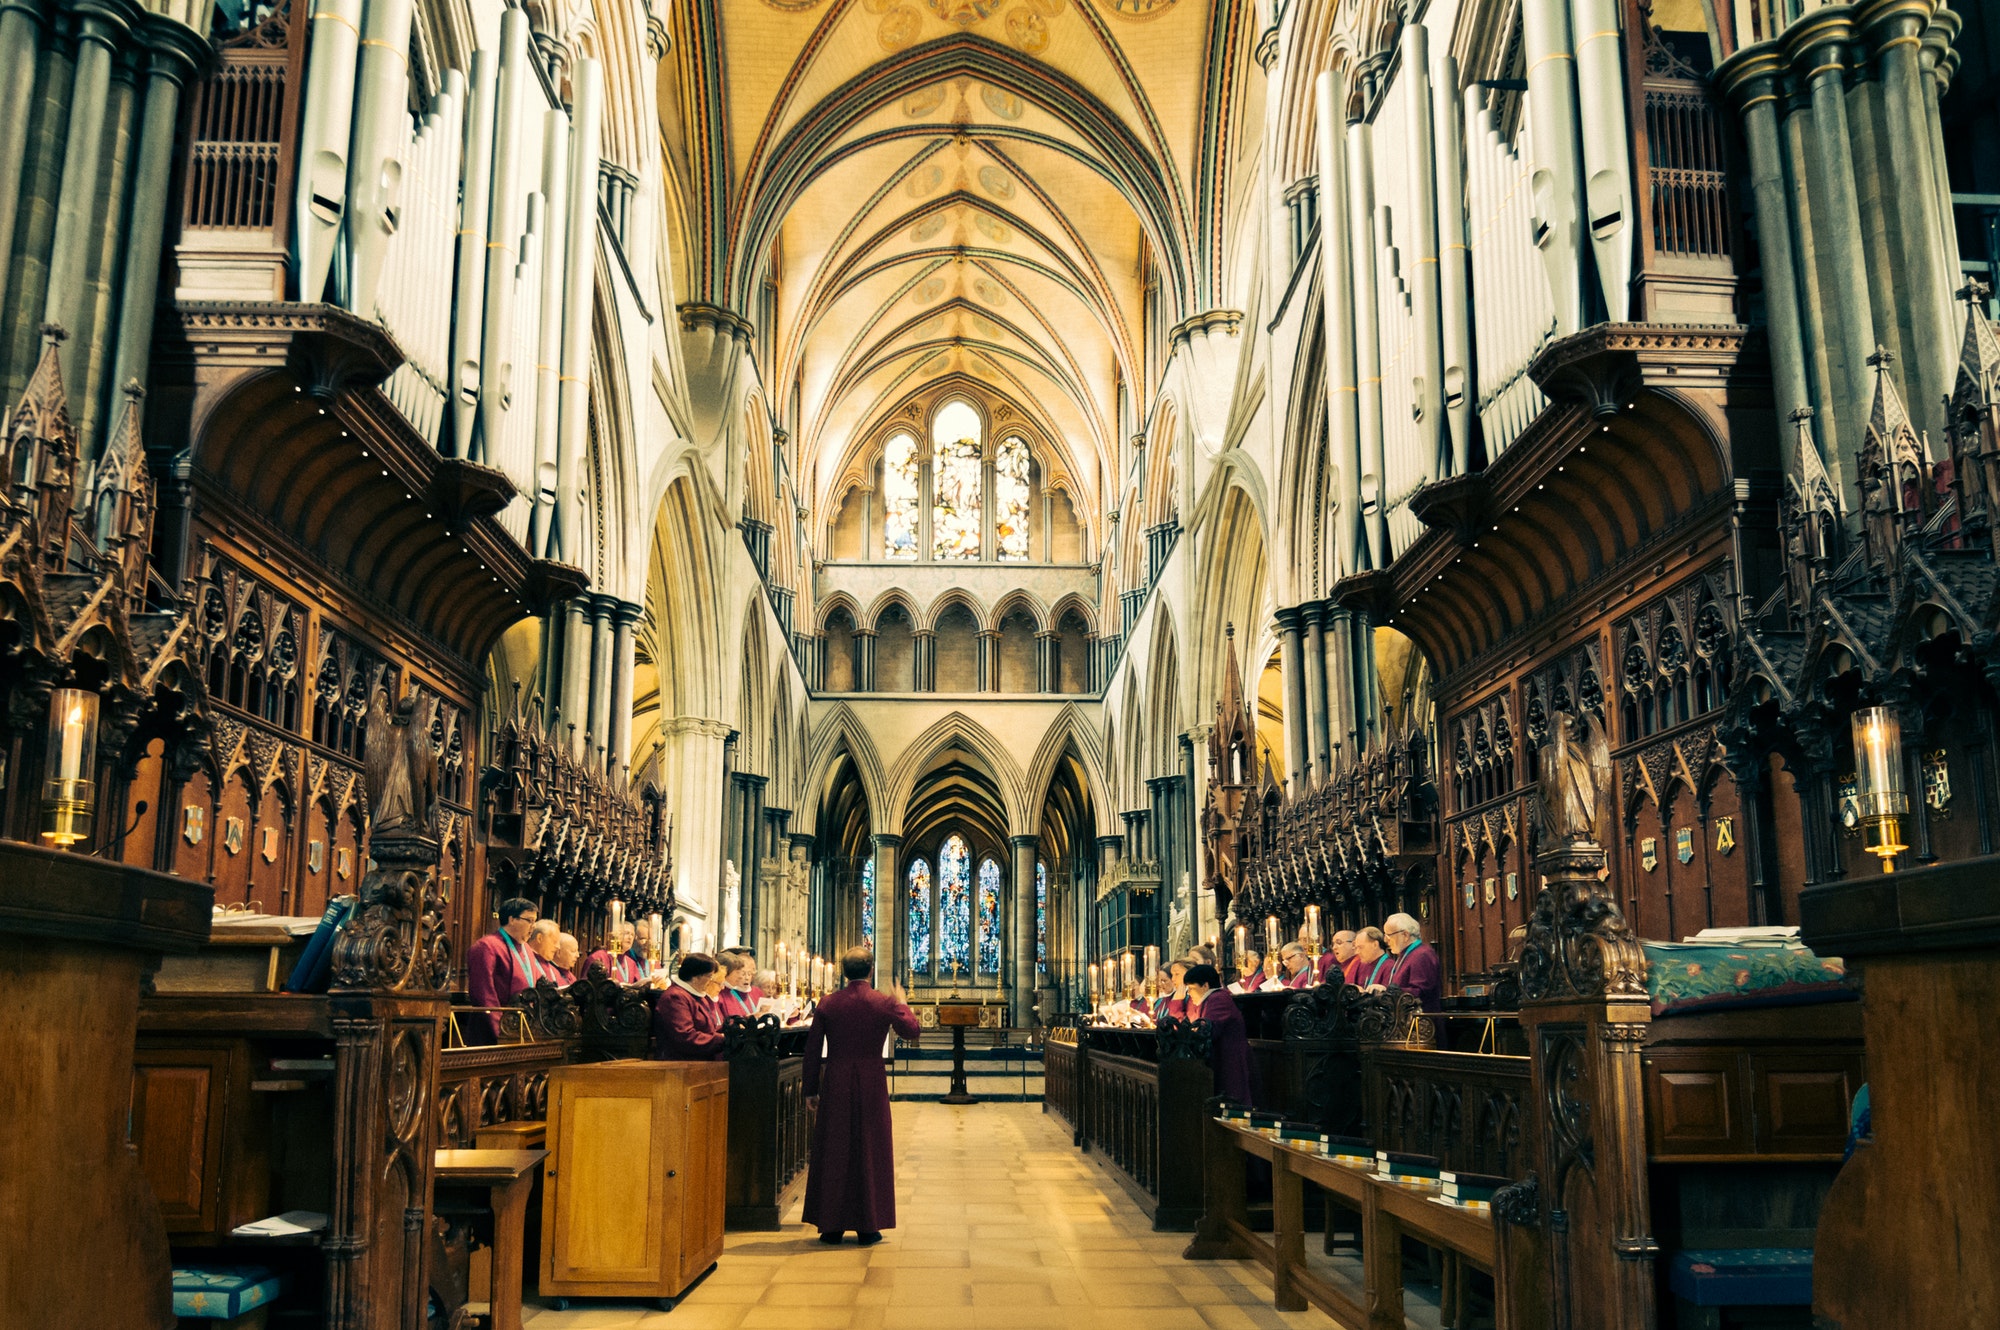 Choir singing in a cathedral